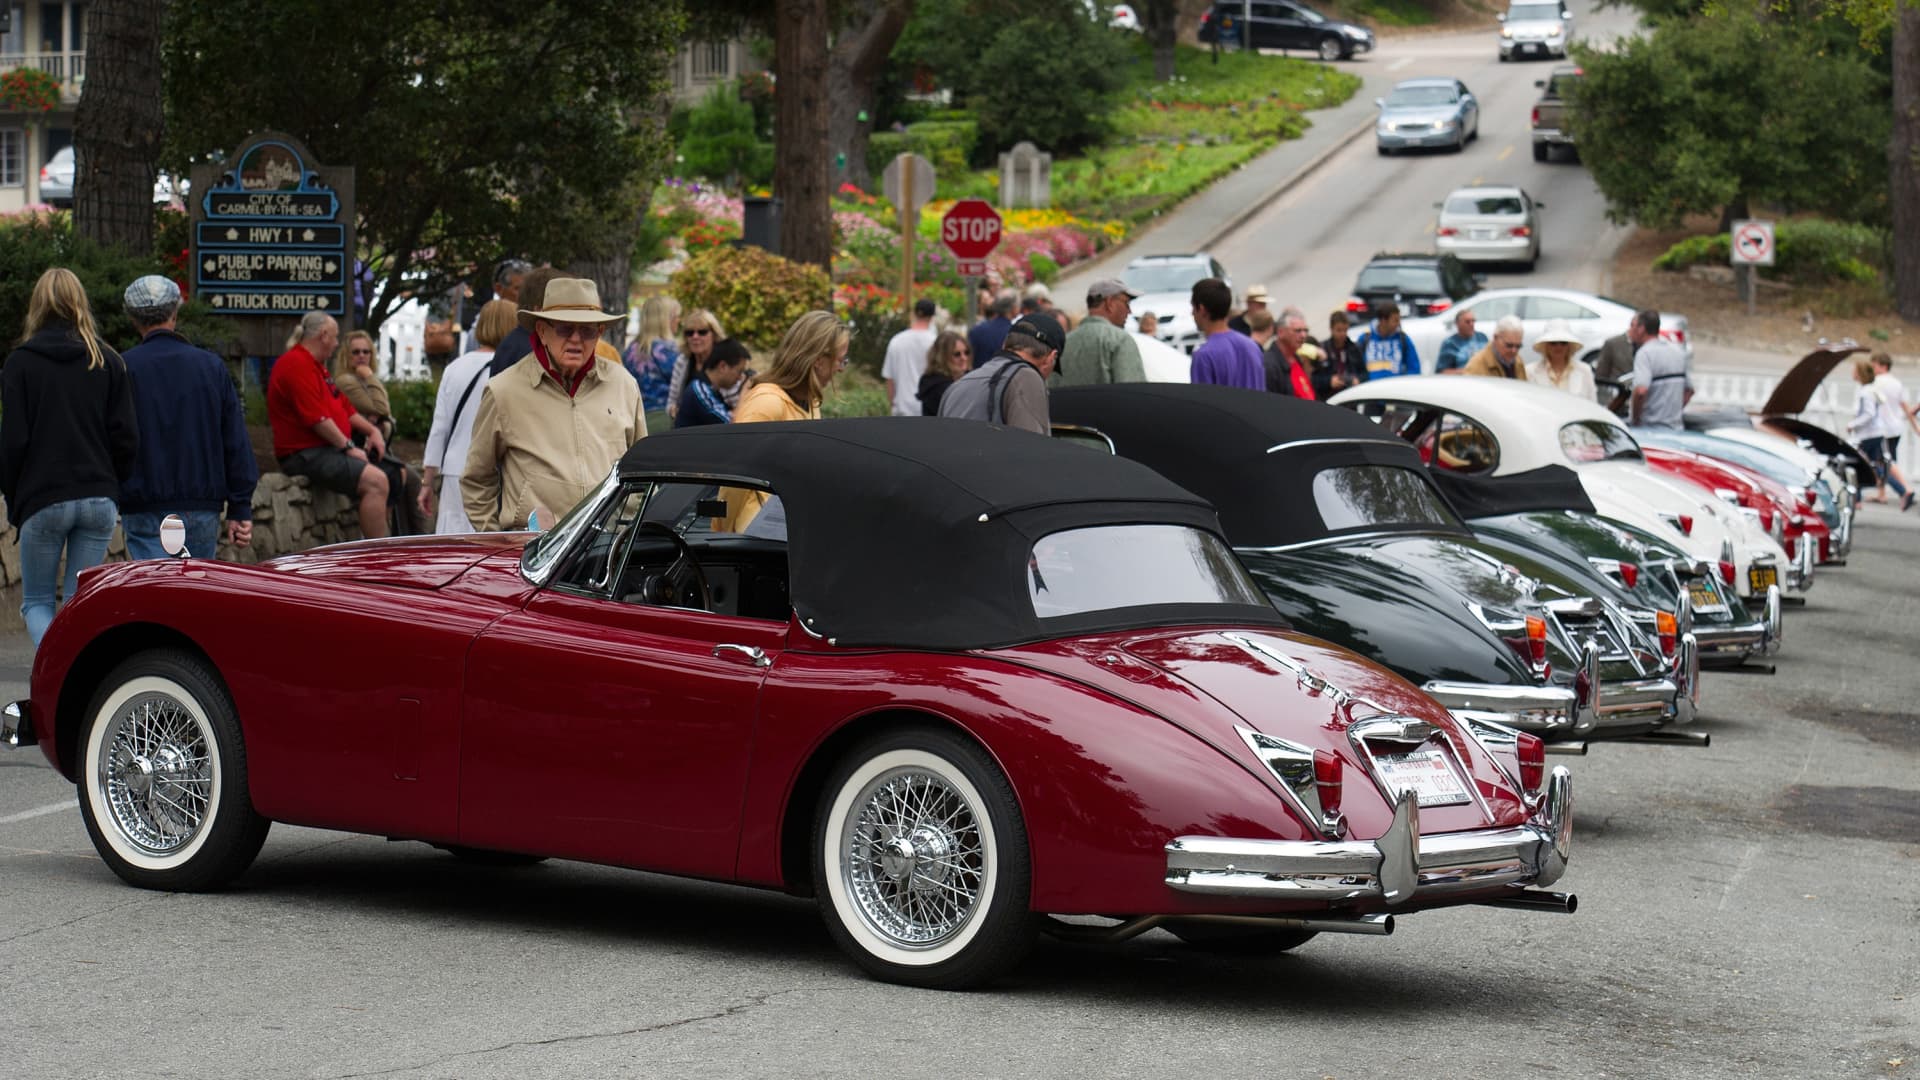 Cars displayed at a car show in Carmel, California, in 2011.